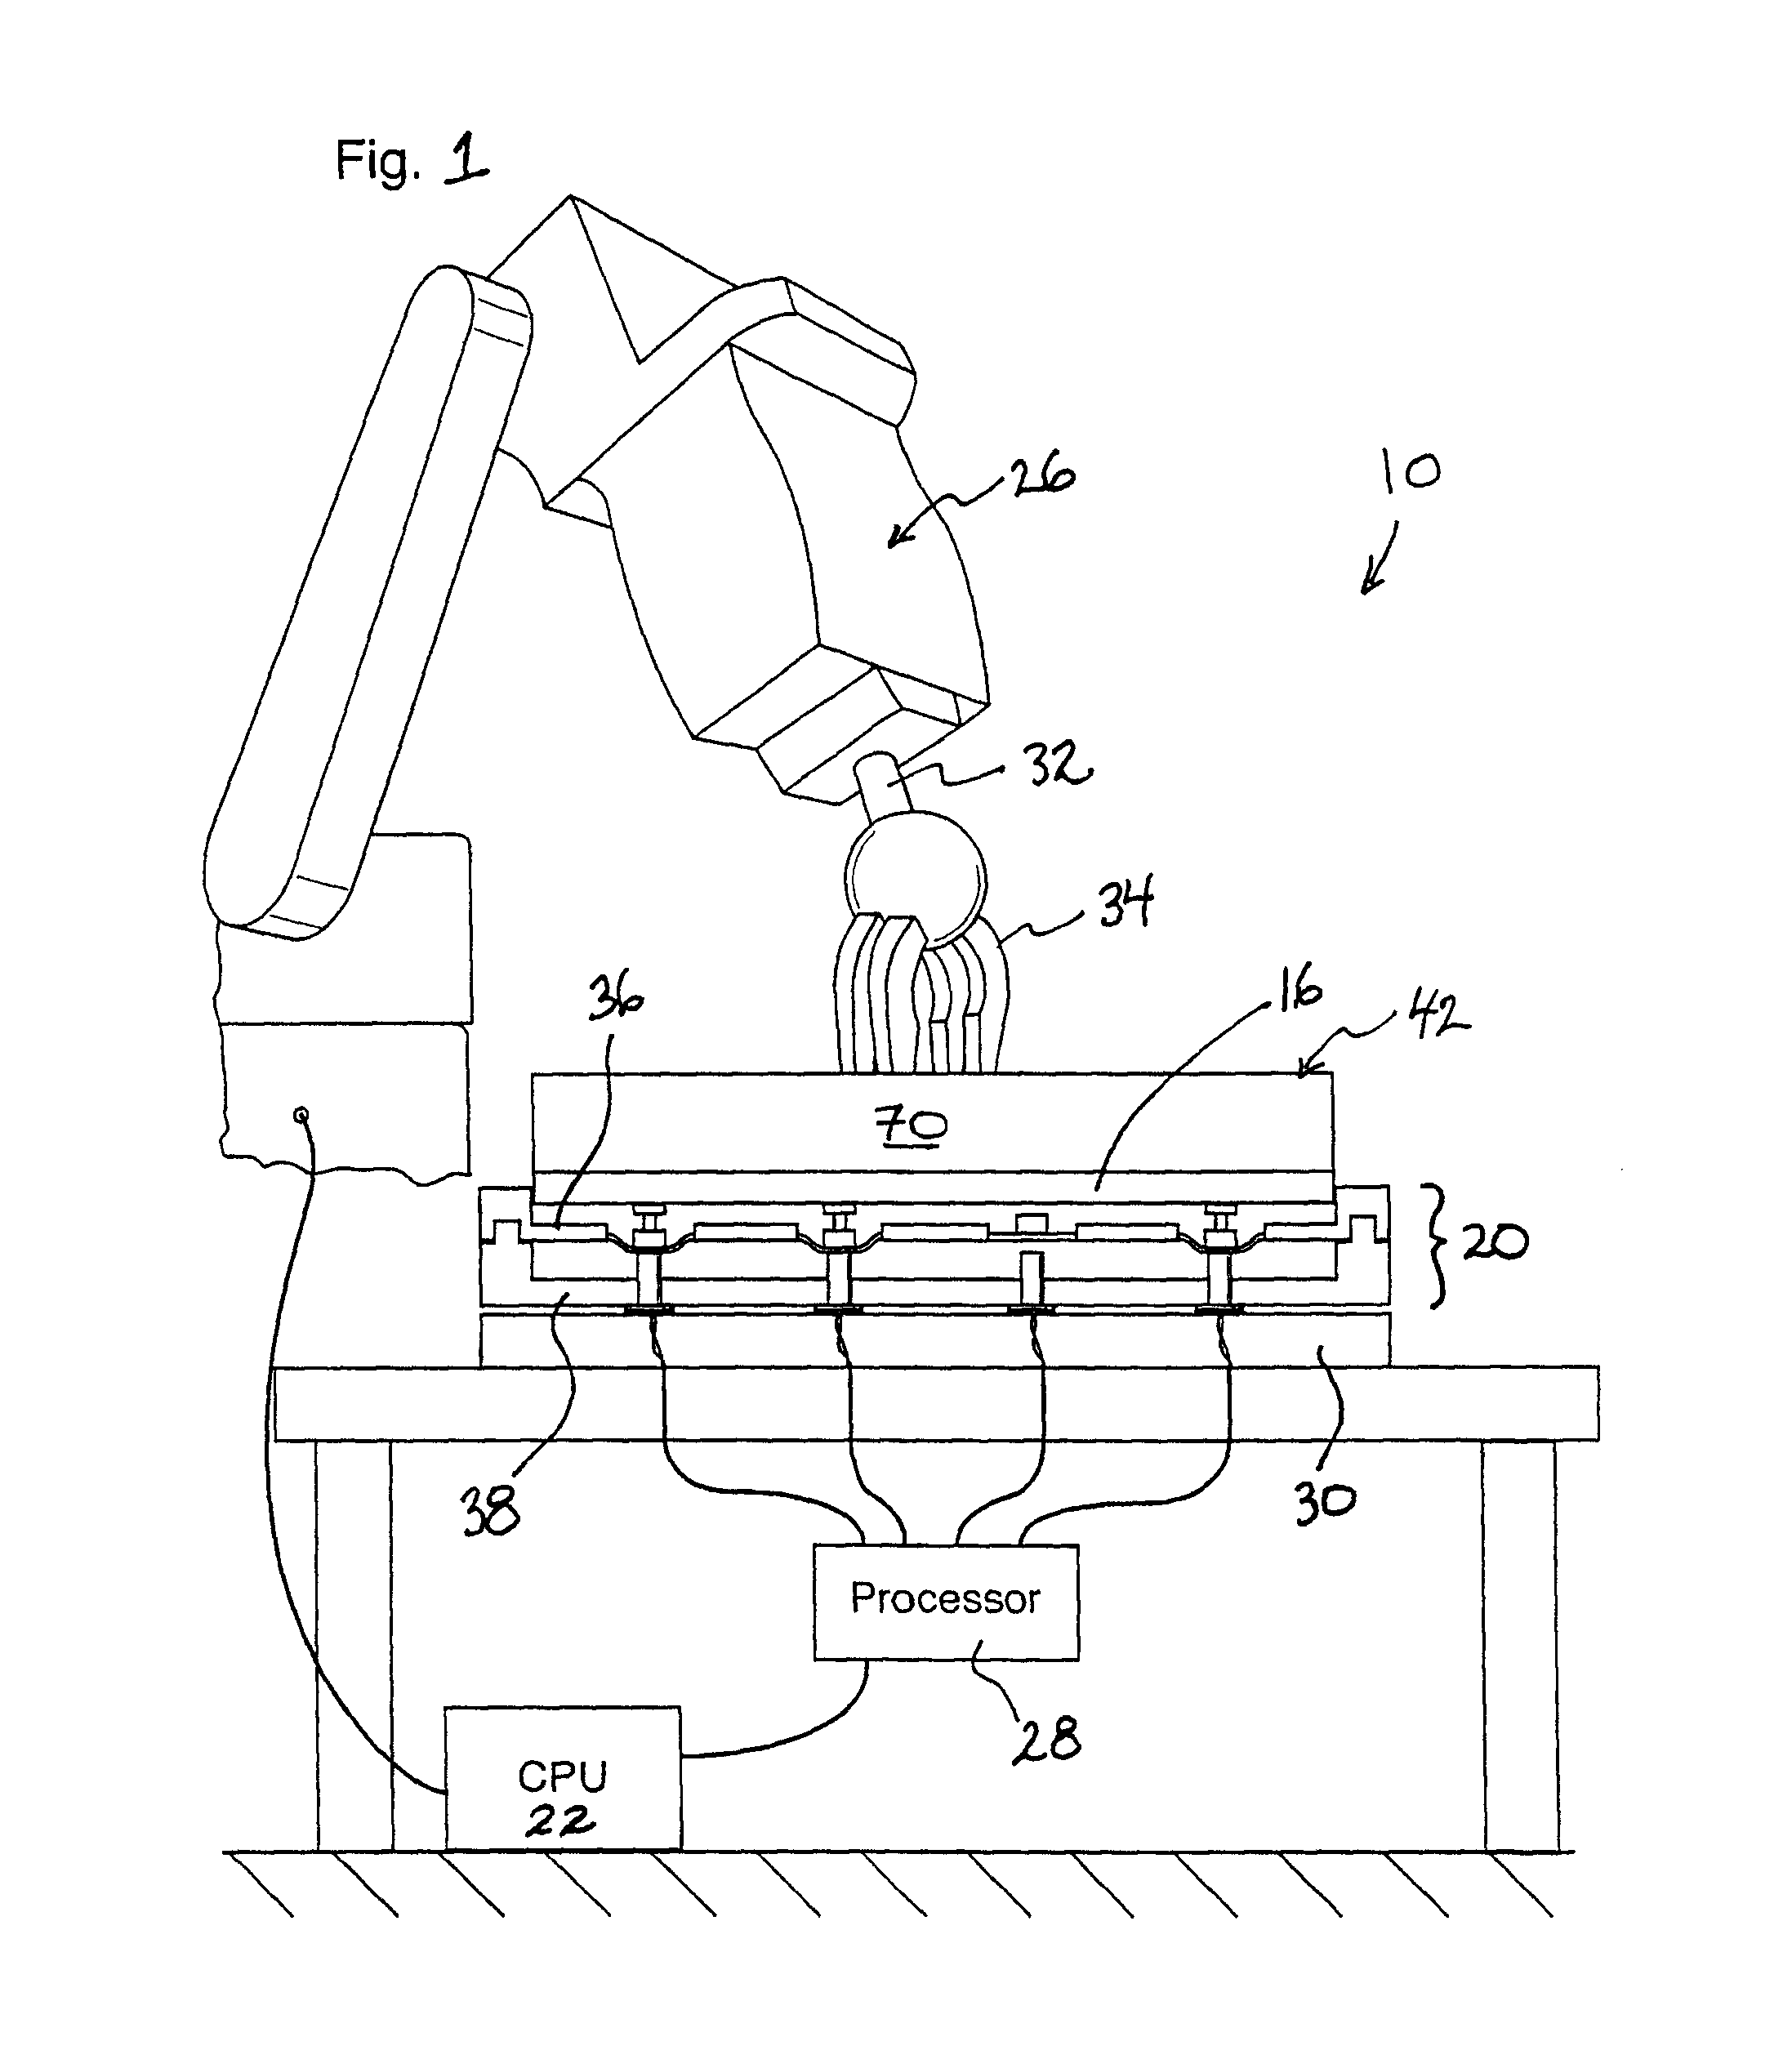 Apparatus for the Automated Testing and Validation of Electronic Components